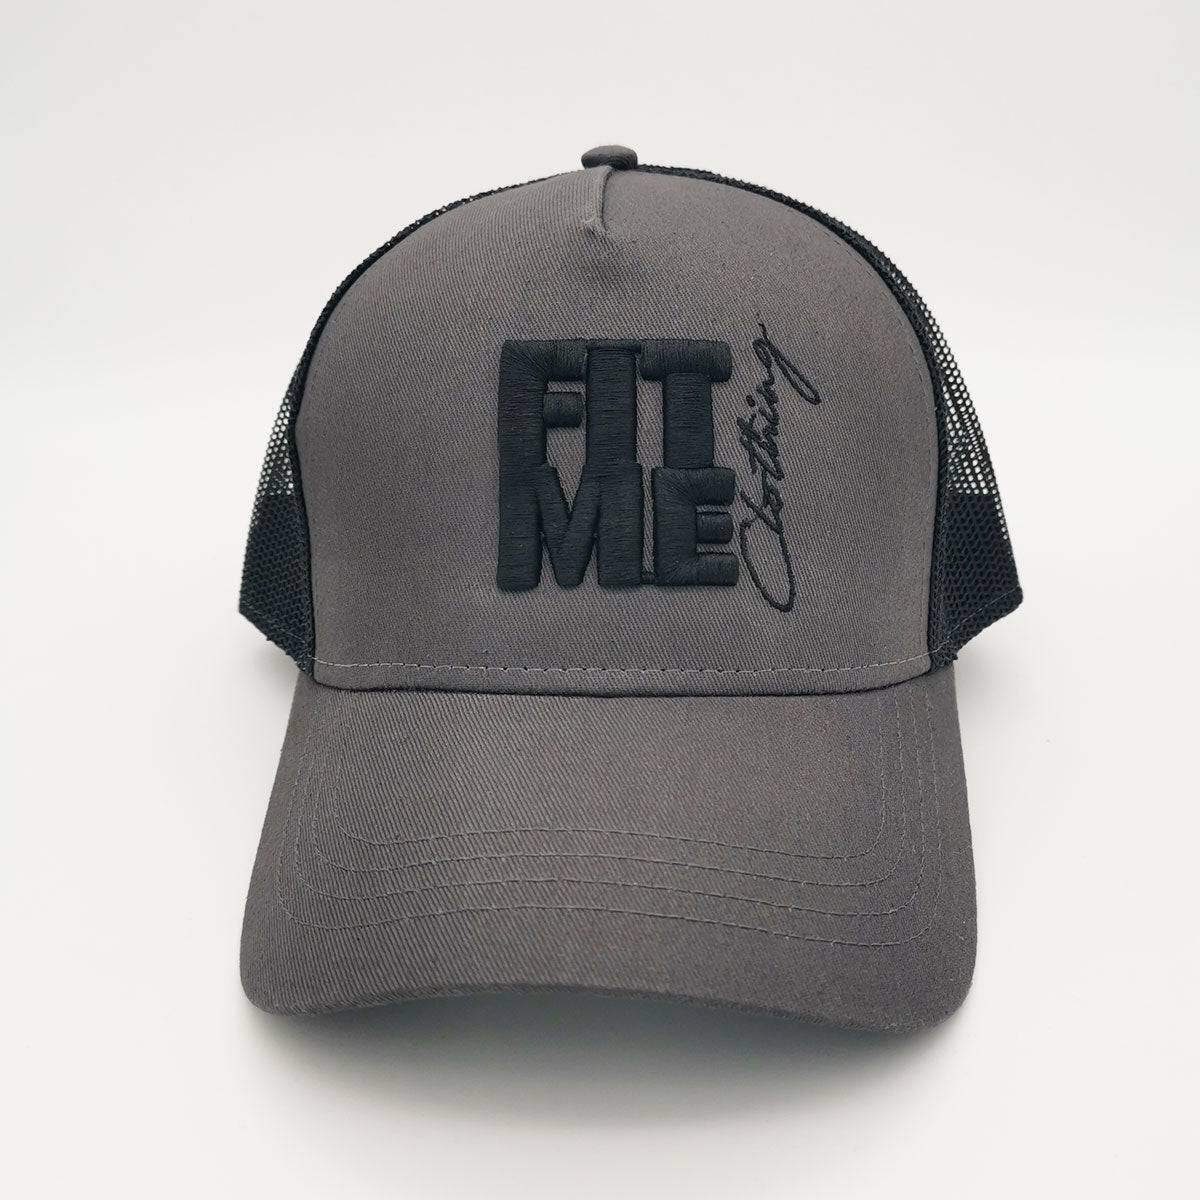 Black And Grey Classic Trucker Cap - FitMe Clothing